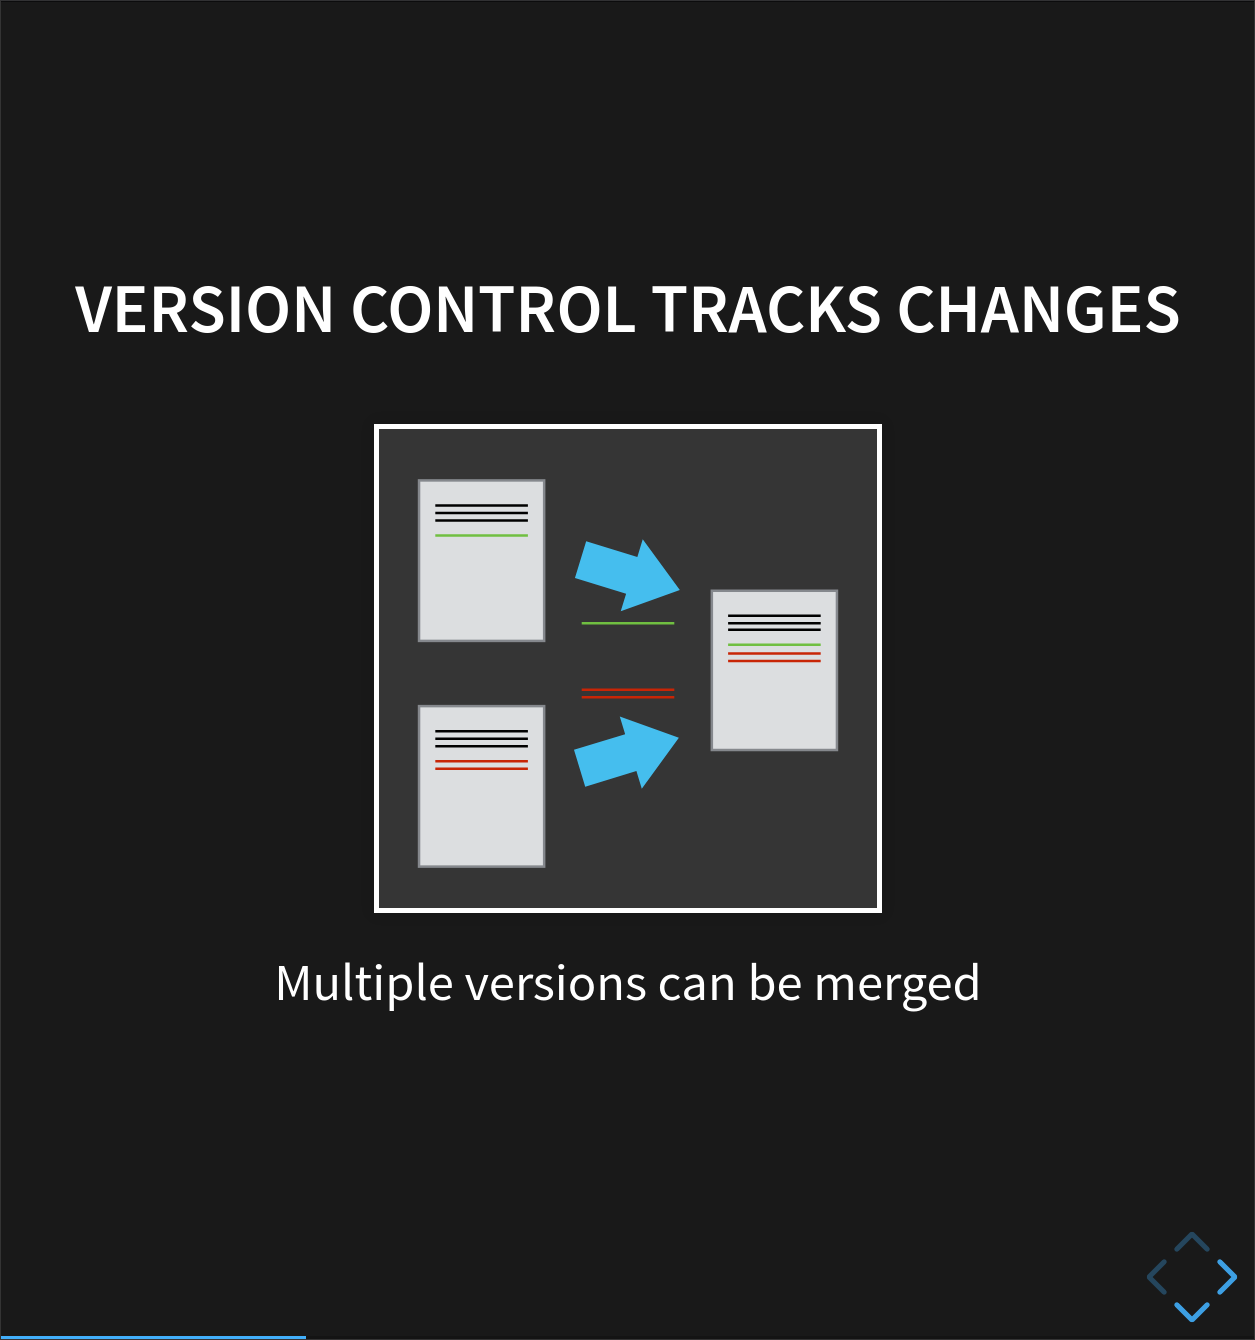 Multiple versions can be merged